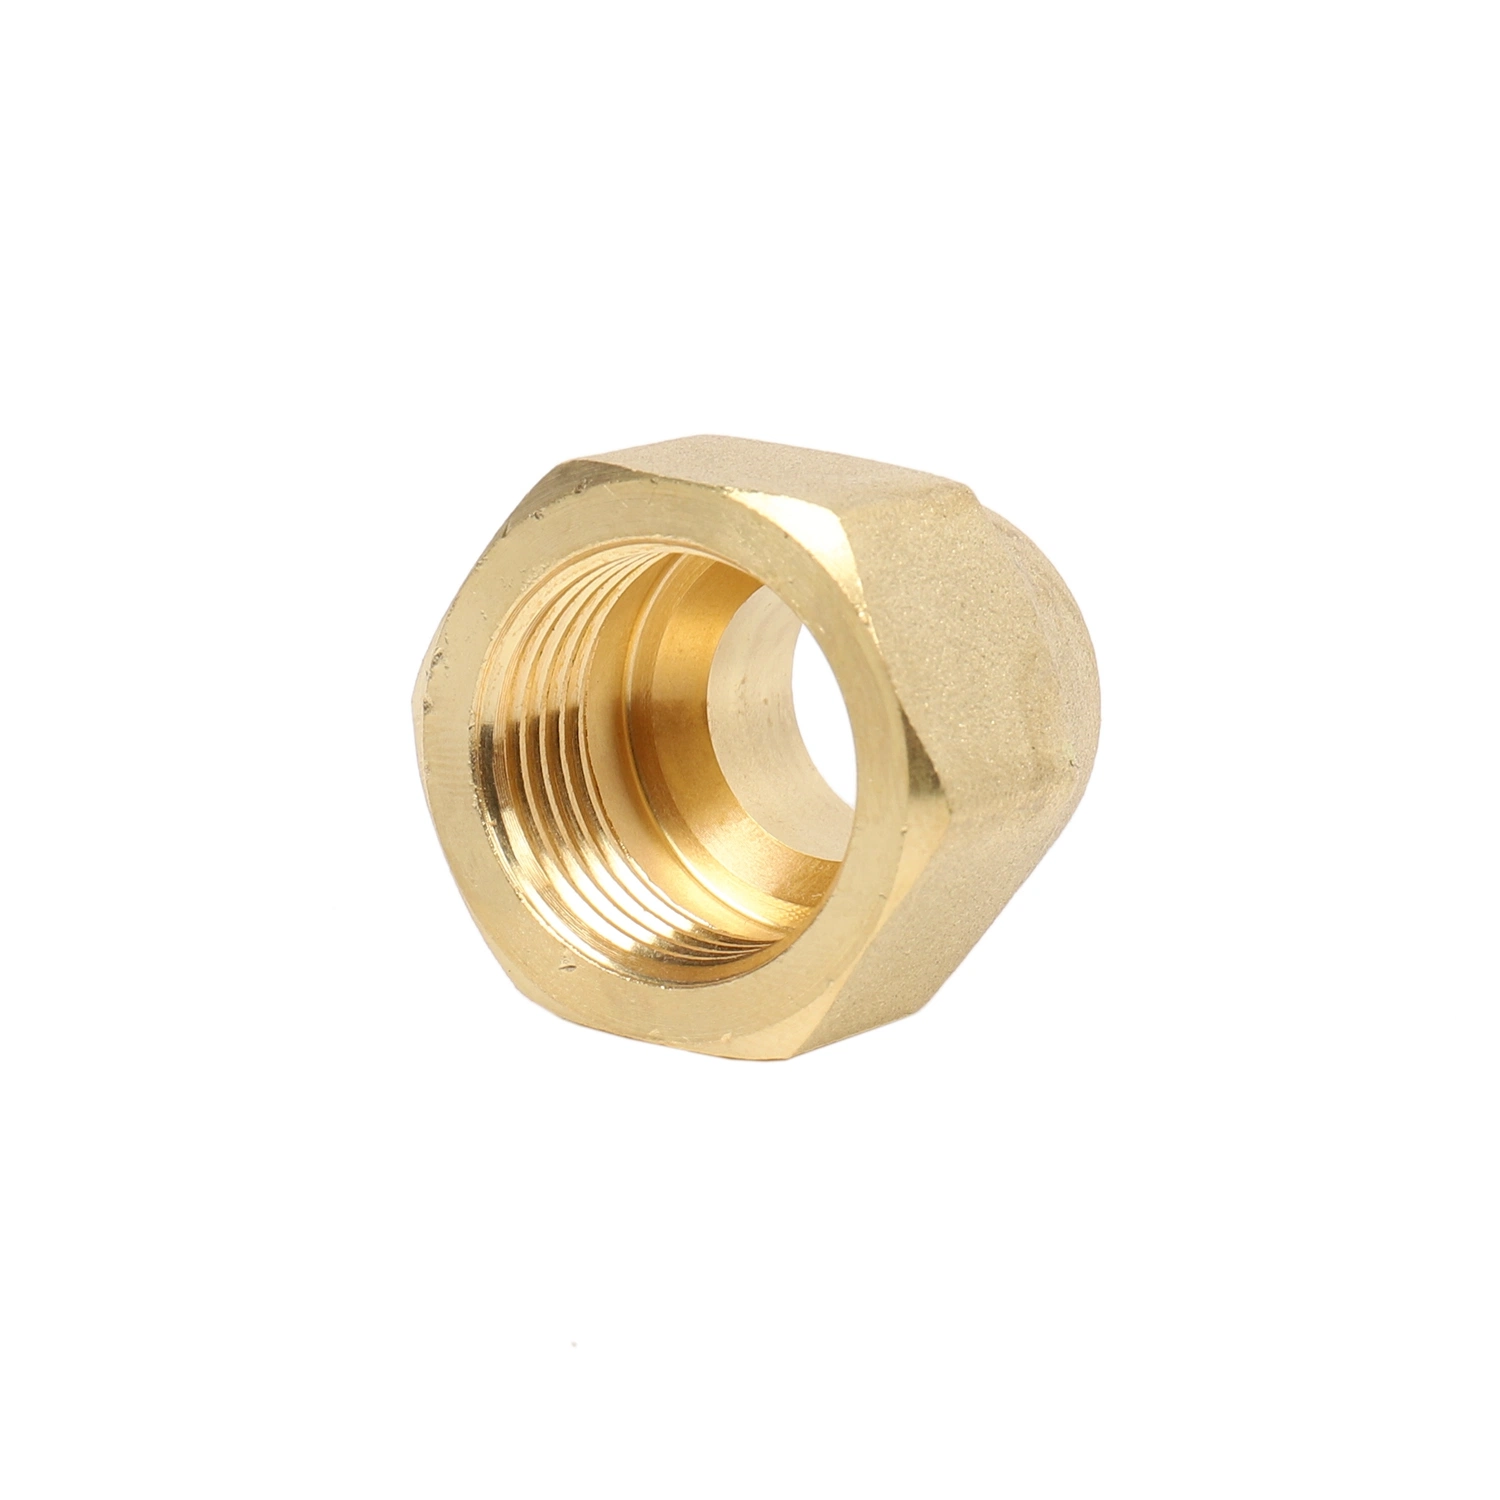 Copper Pipe Compression Joint Fittings Threaded Brass Pipe Fittings Refrigeration Copper Press Fittings